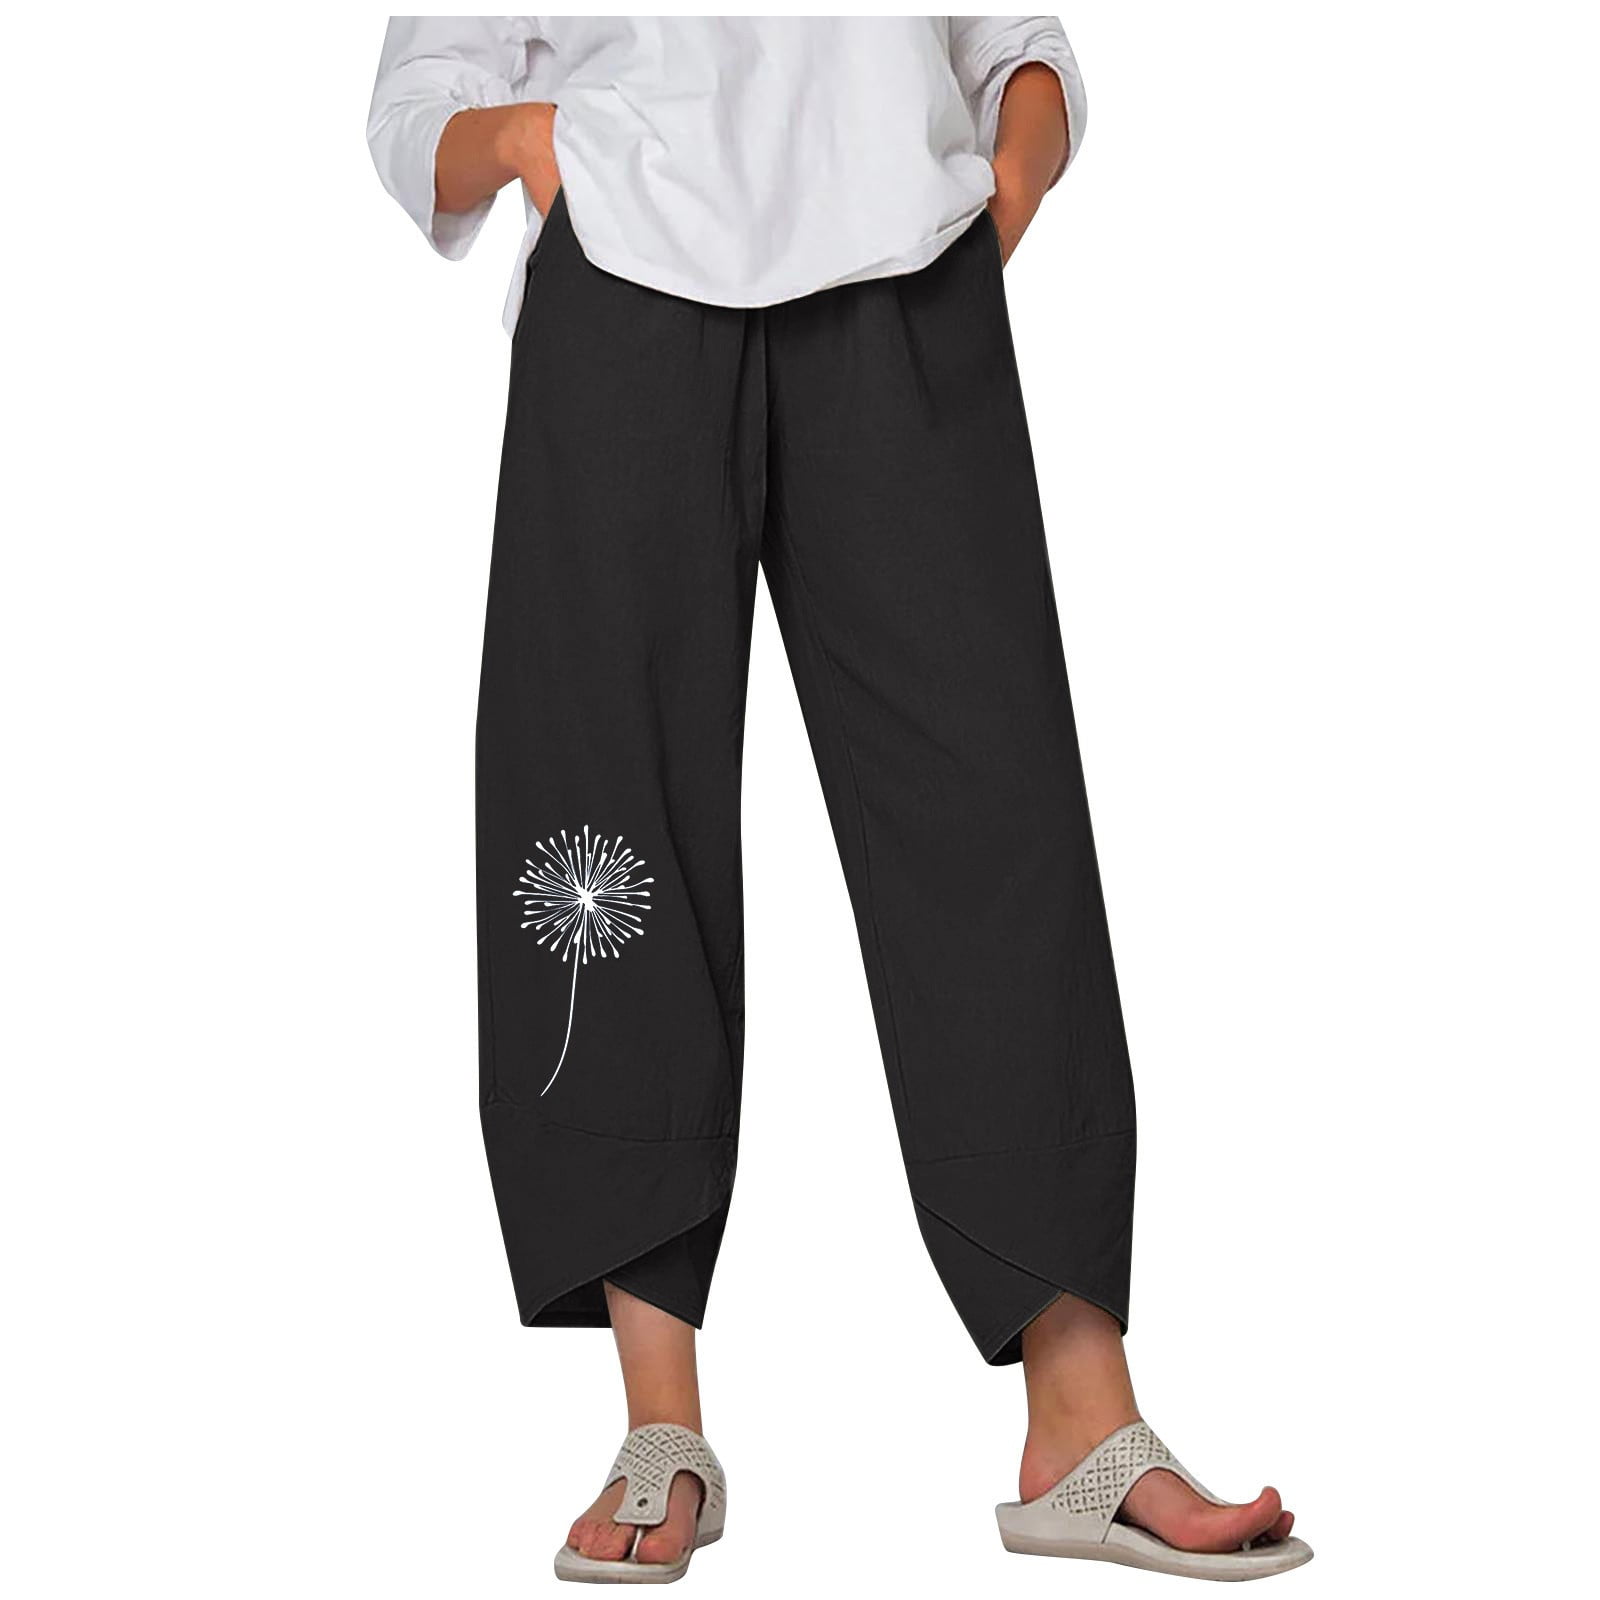 Larisalt Pants For Women,Classic Adult Footed Sweatpants with Sherpa Lined  Feet Cozy and Soft Black,S - Walmart.com